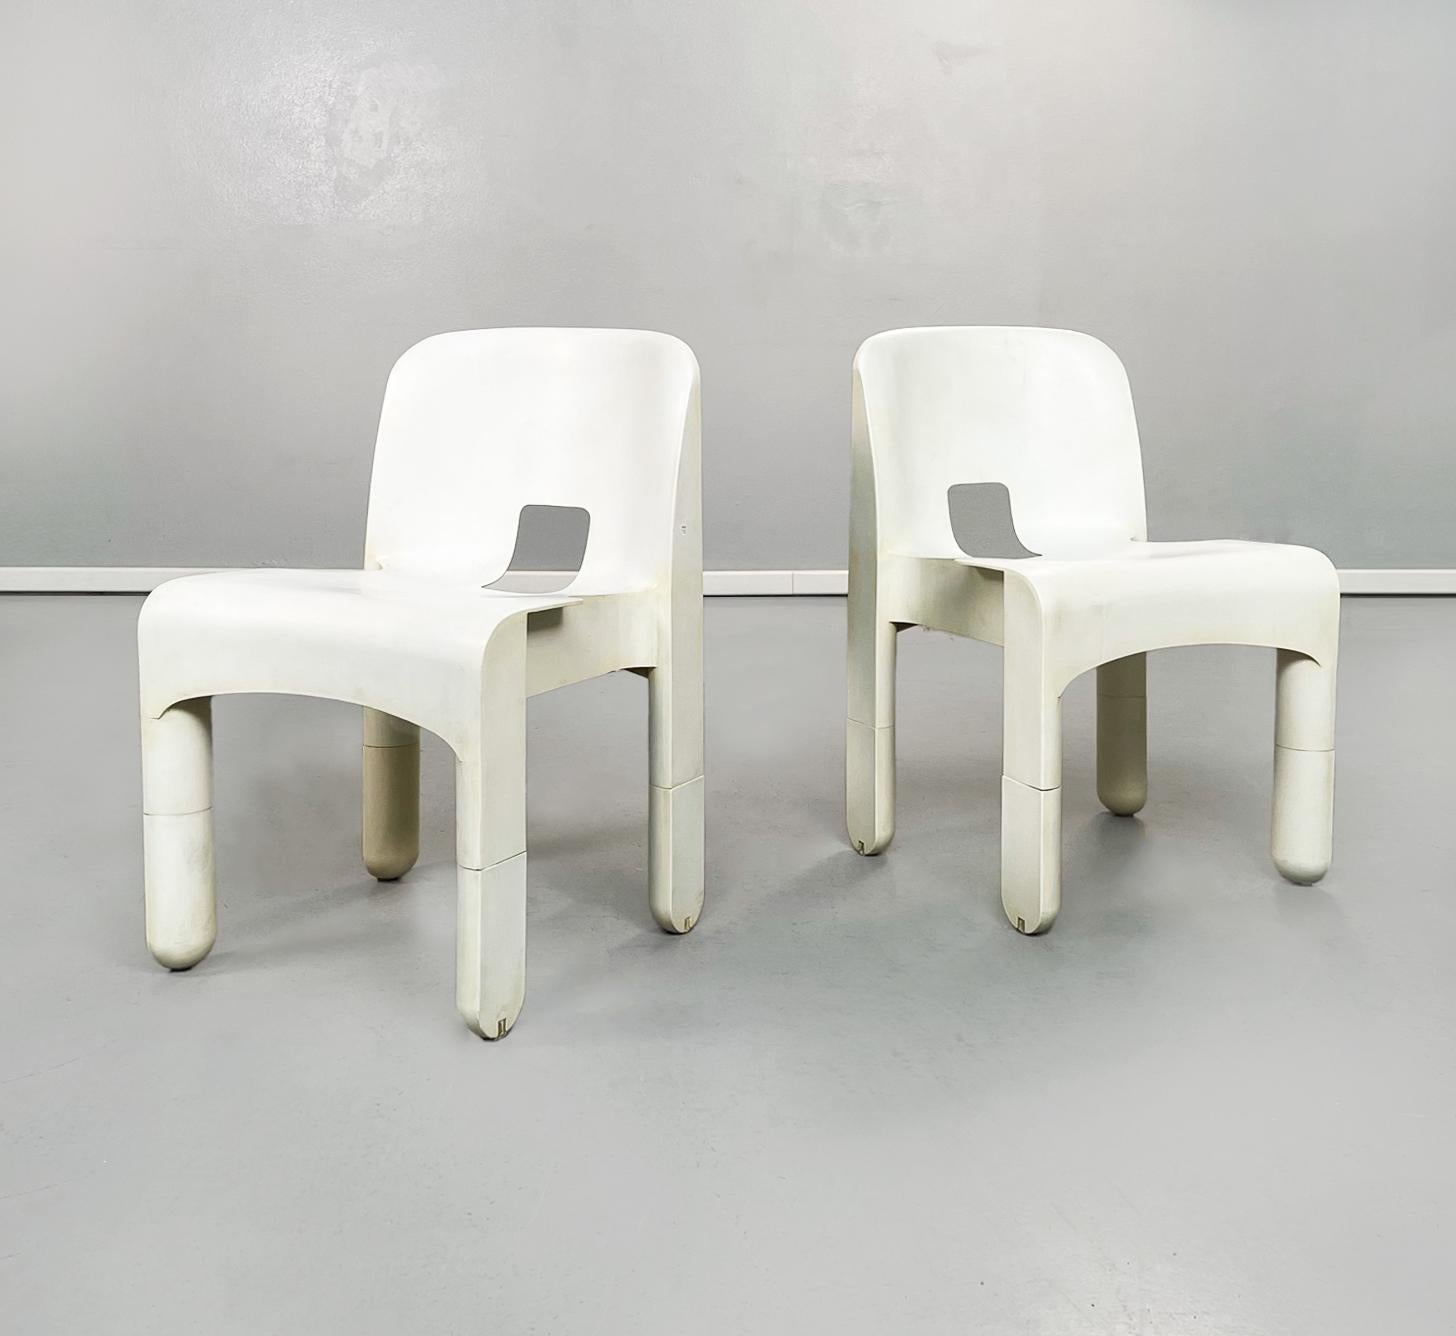 Italian mid-century White plastic chairs 860 by Joe Colombo for Kartell, 1970s
Set of 4 chairs model 860, know also as Universale chair, in cream white ABS plastic. The rectangular seat has two flaps on the outside. The slightly curved backrest is